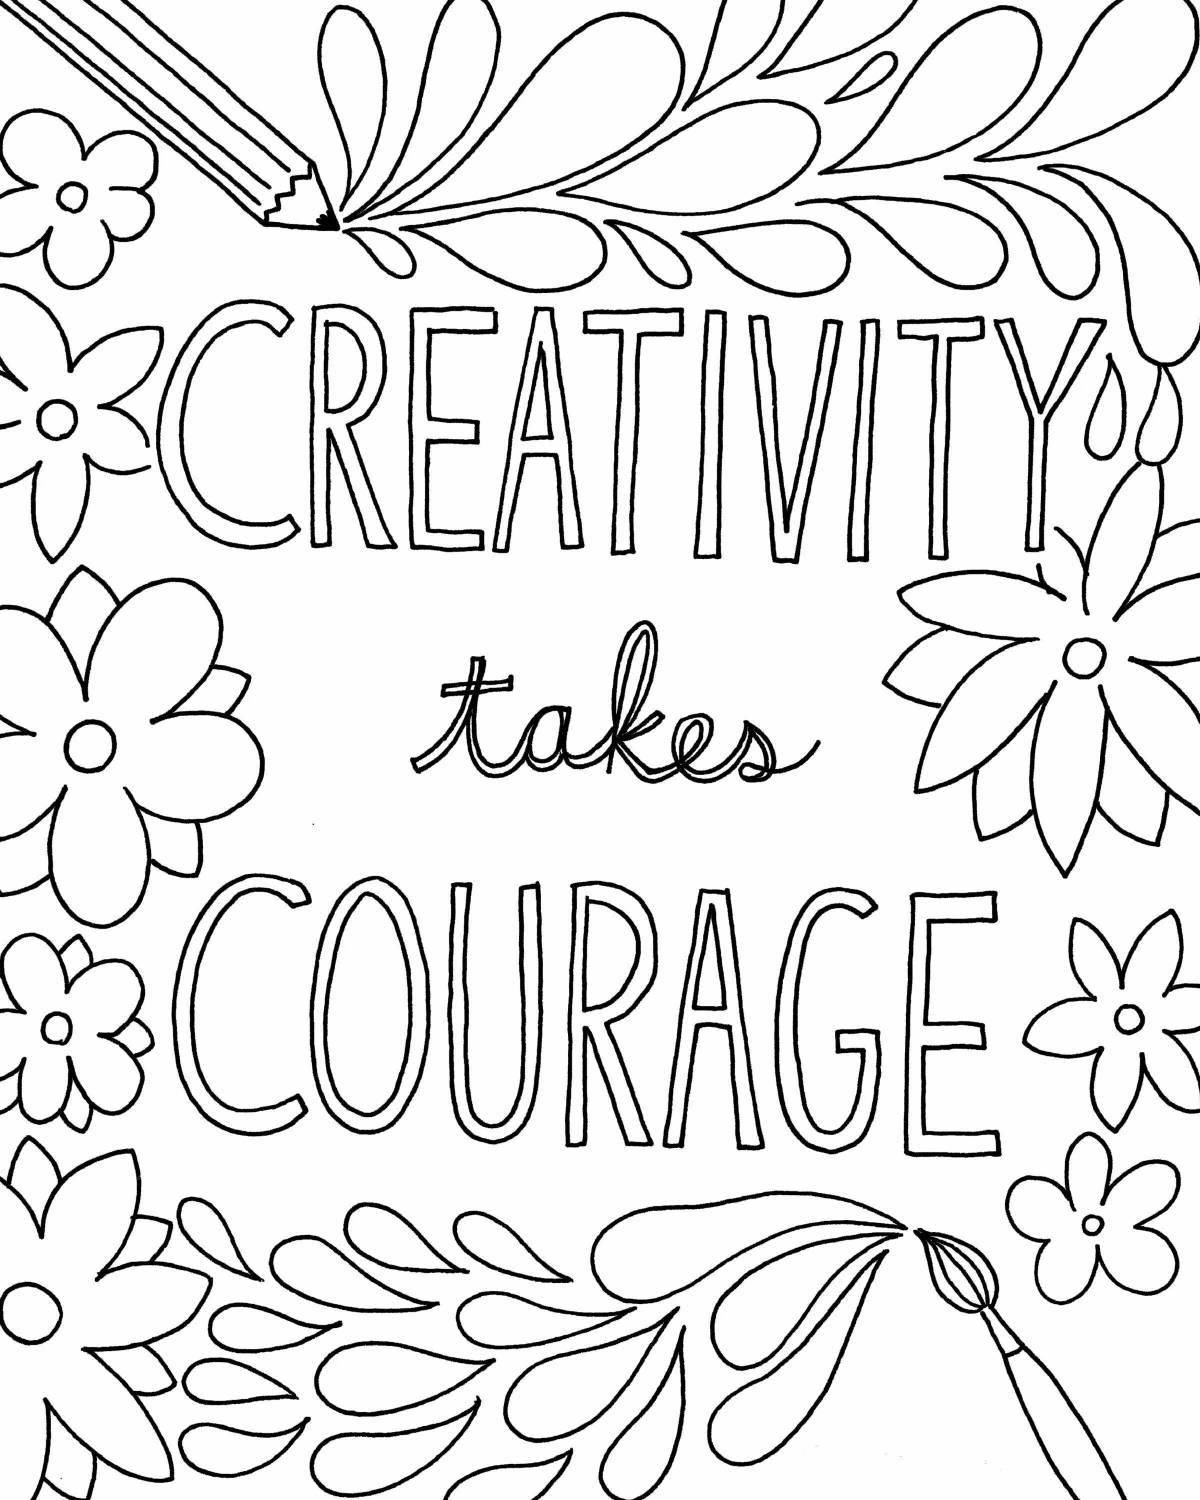 Fun quotes coloring pages